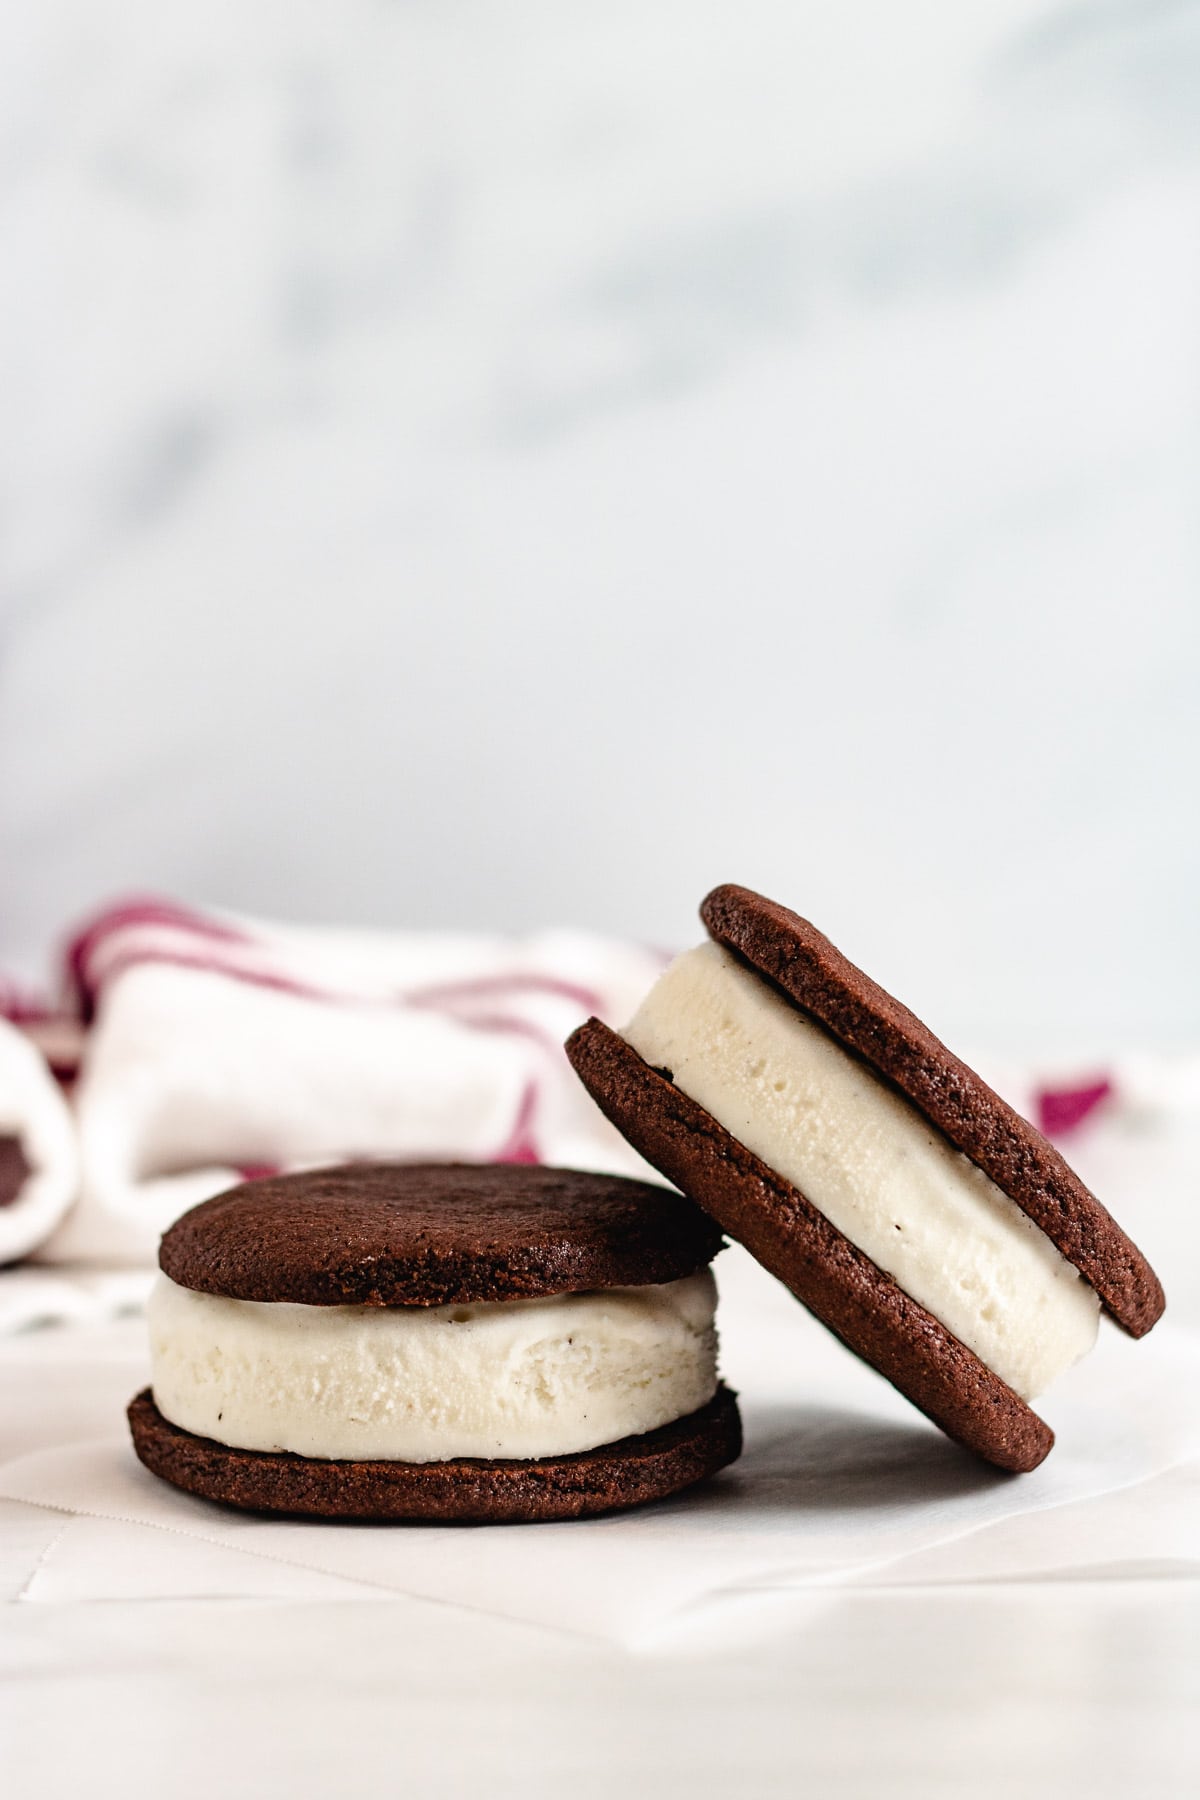 Two ice cream sandwiches on parchment paper.